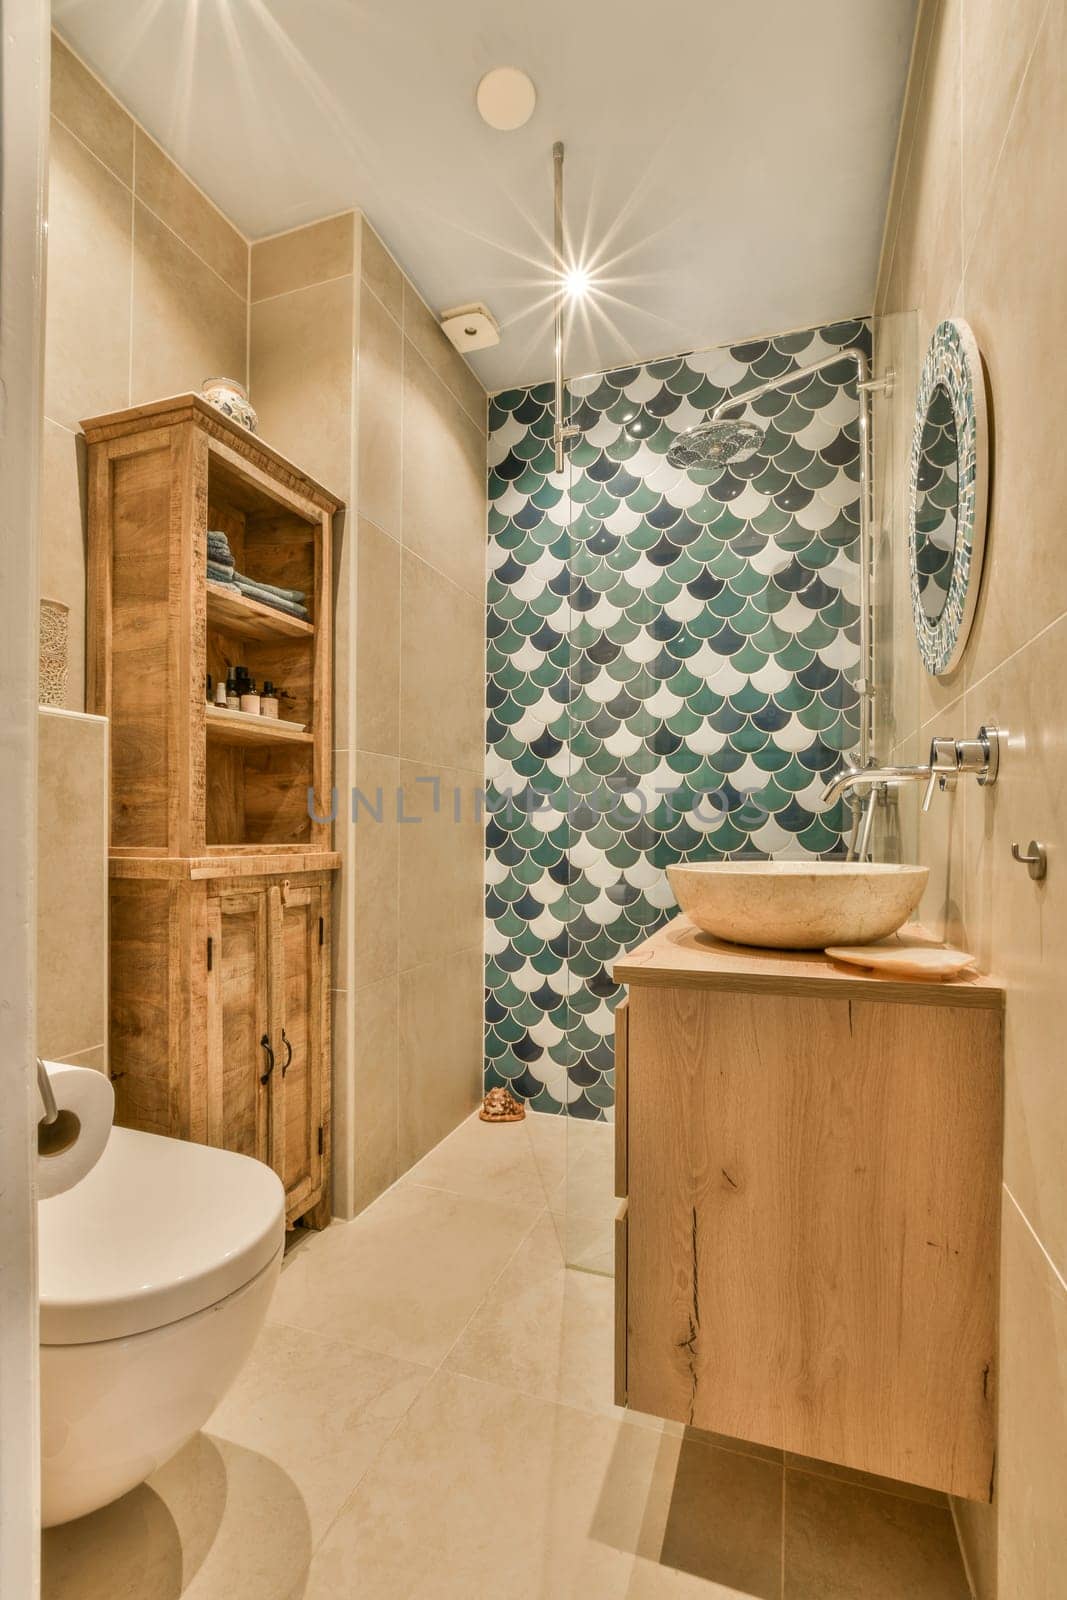 a bathroom with blue and white tiles on the walls, wood cabinets in the corner, and a wooden sink